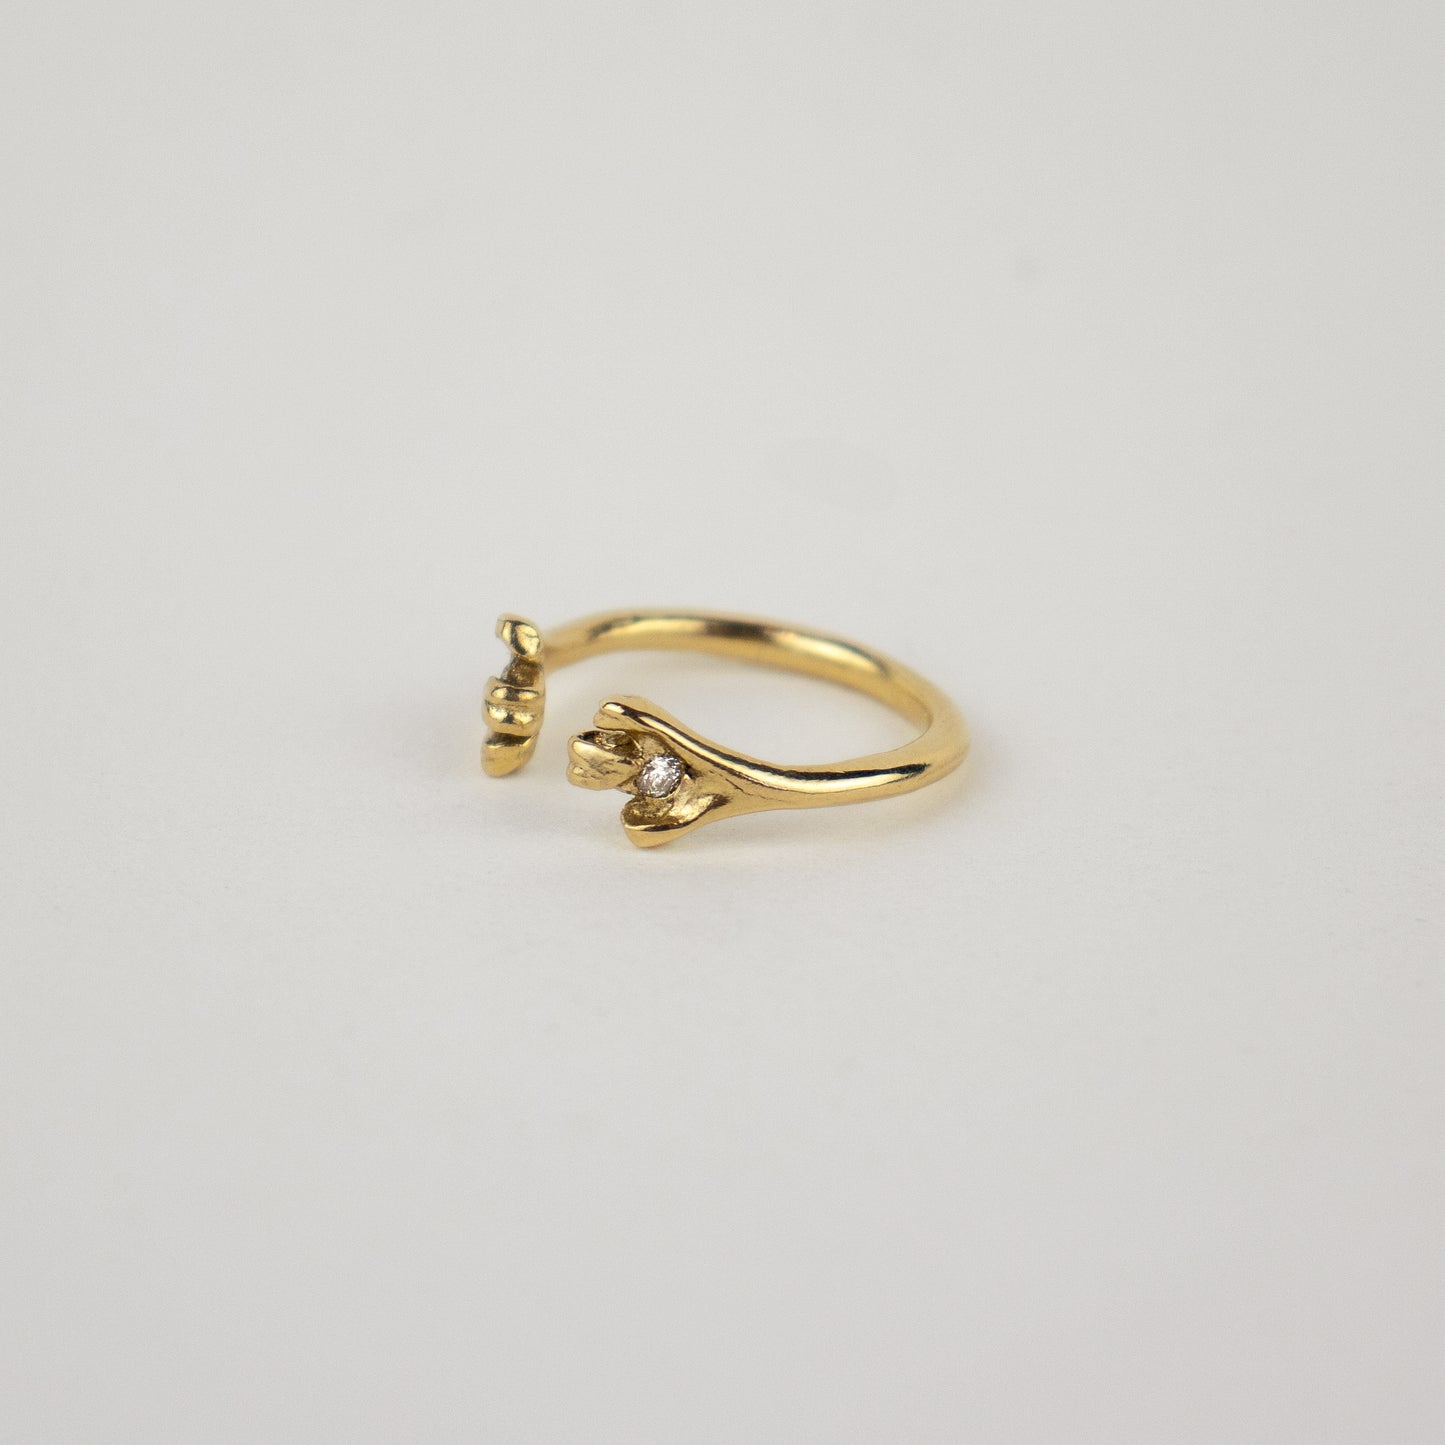 Solid reclaimed 14k gold femur ring set with two 2mm diamonds and adjustable for ring sizes 5 to 6.5 made-to-order and finished in our Catskills store-studio.